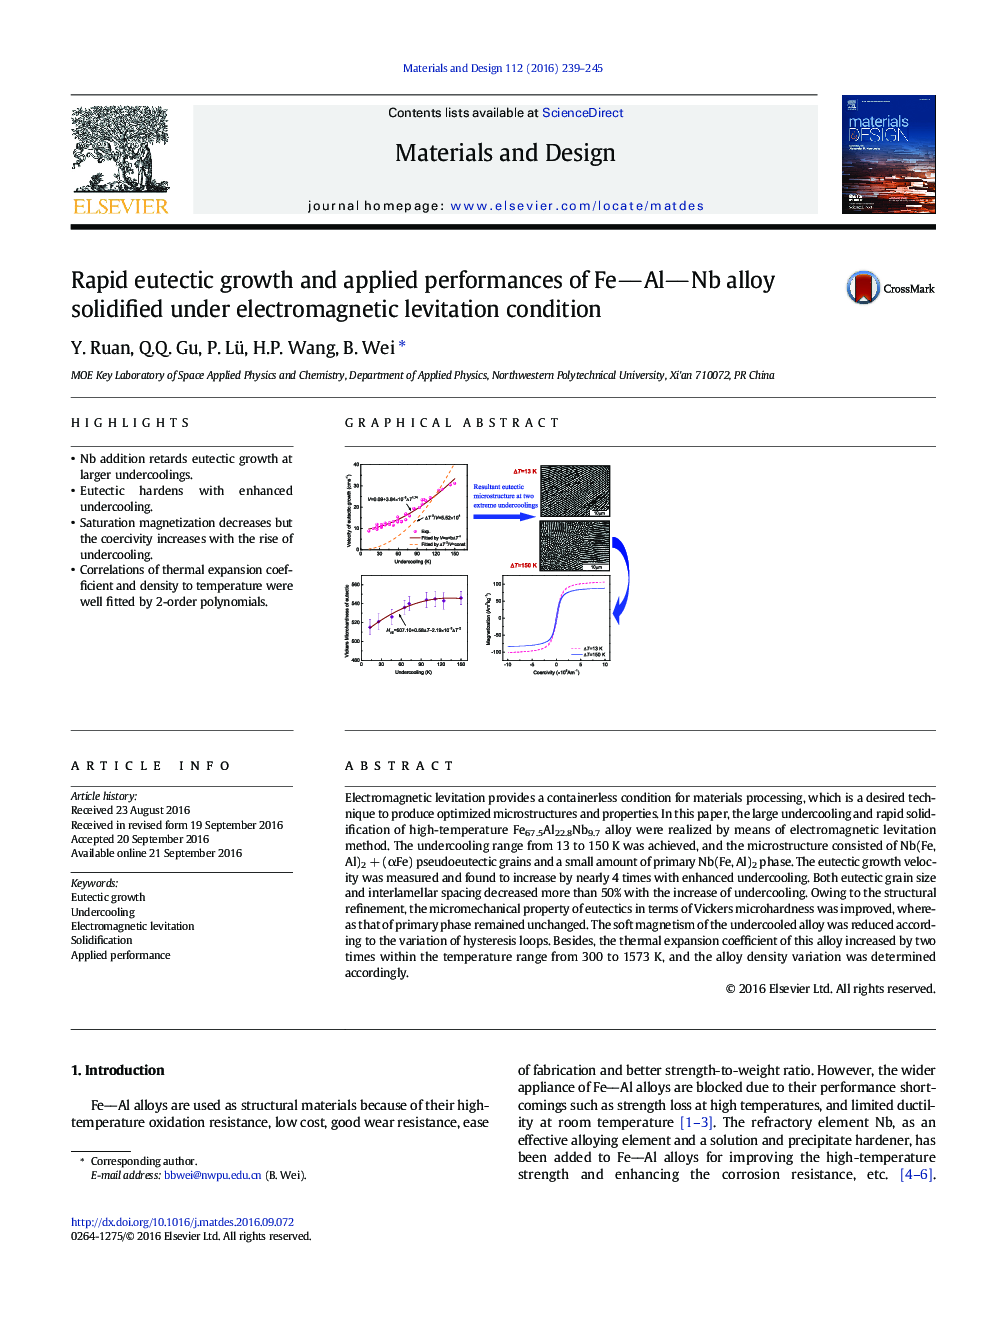 Rapid eutectic growth and applied performances of FeAlNb alloy solidified under electromagnetic levitation condition